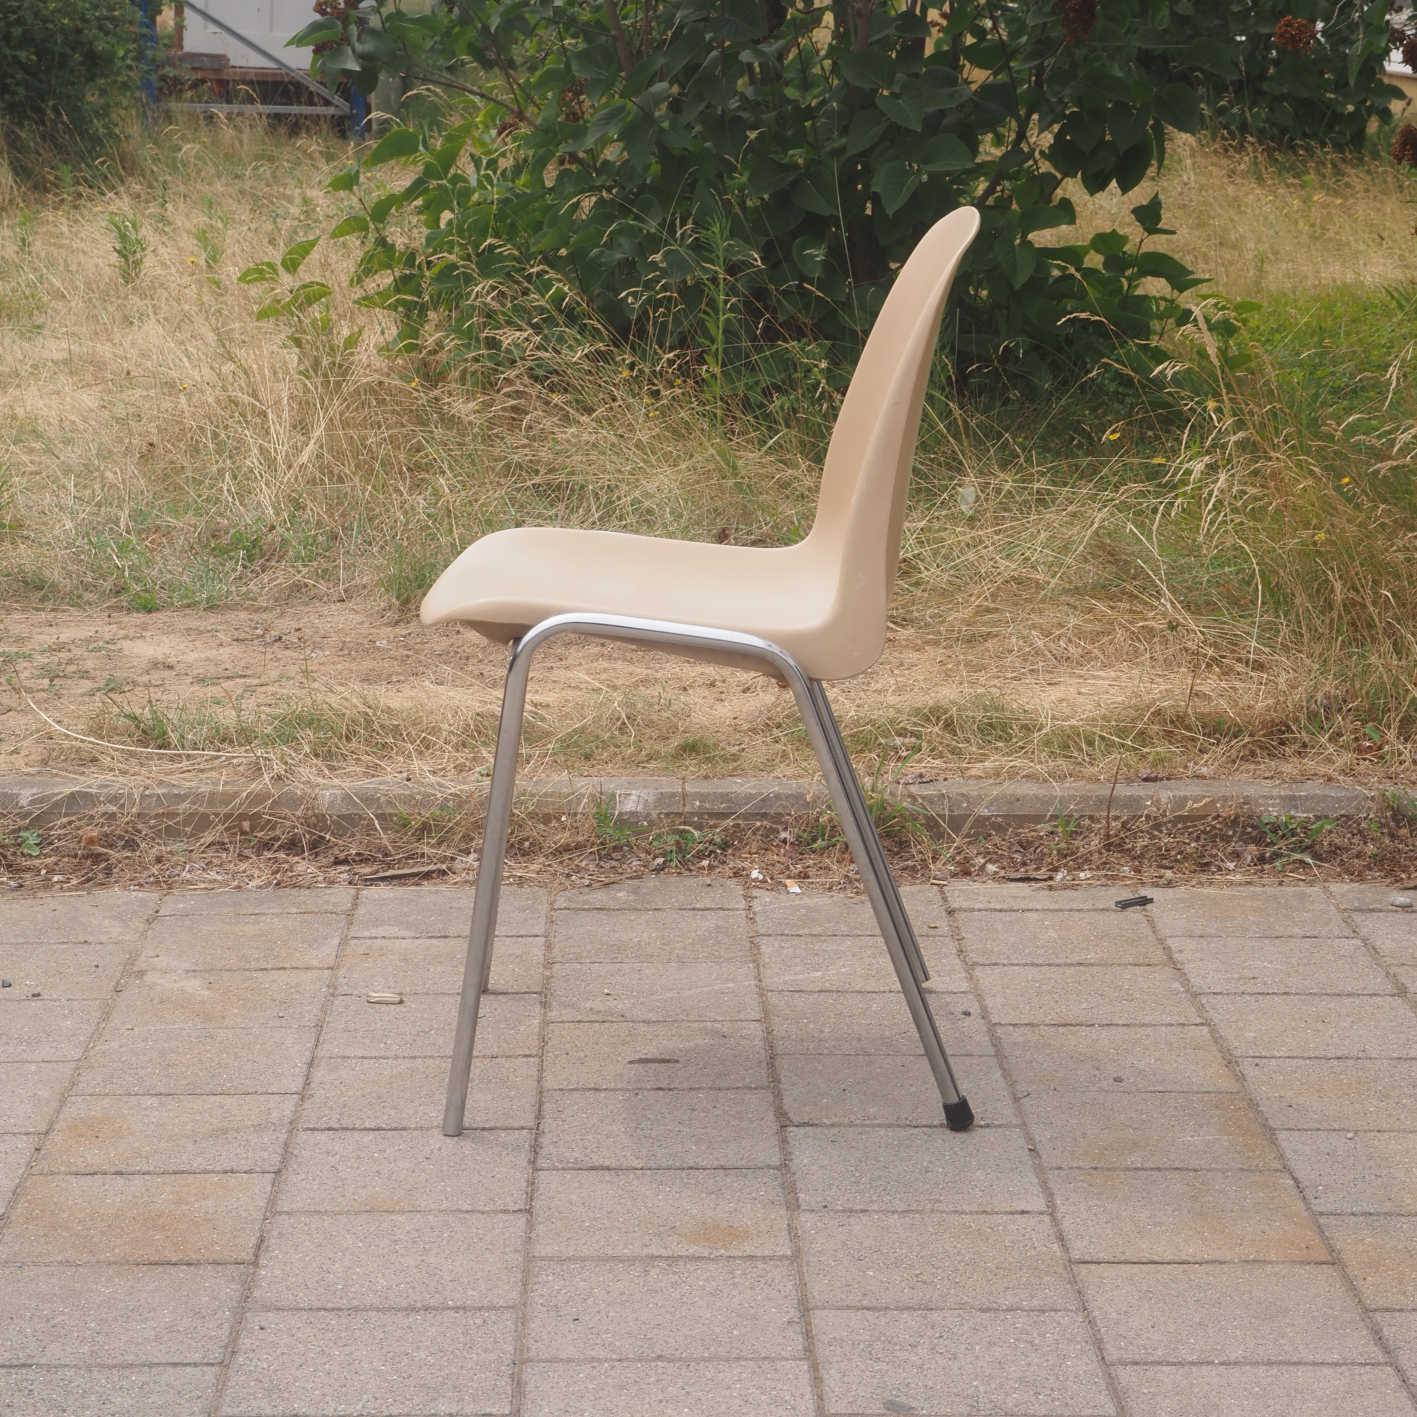 Stackable chair 'Selena' by Dipiplast